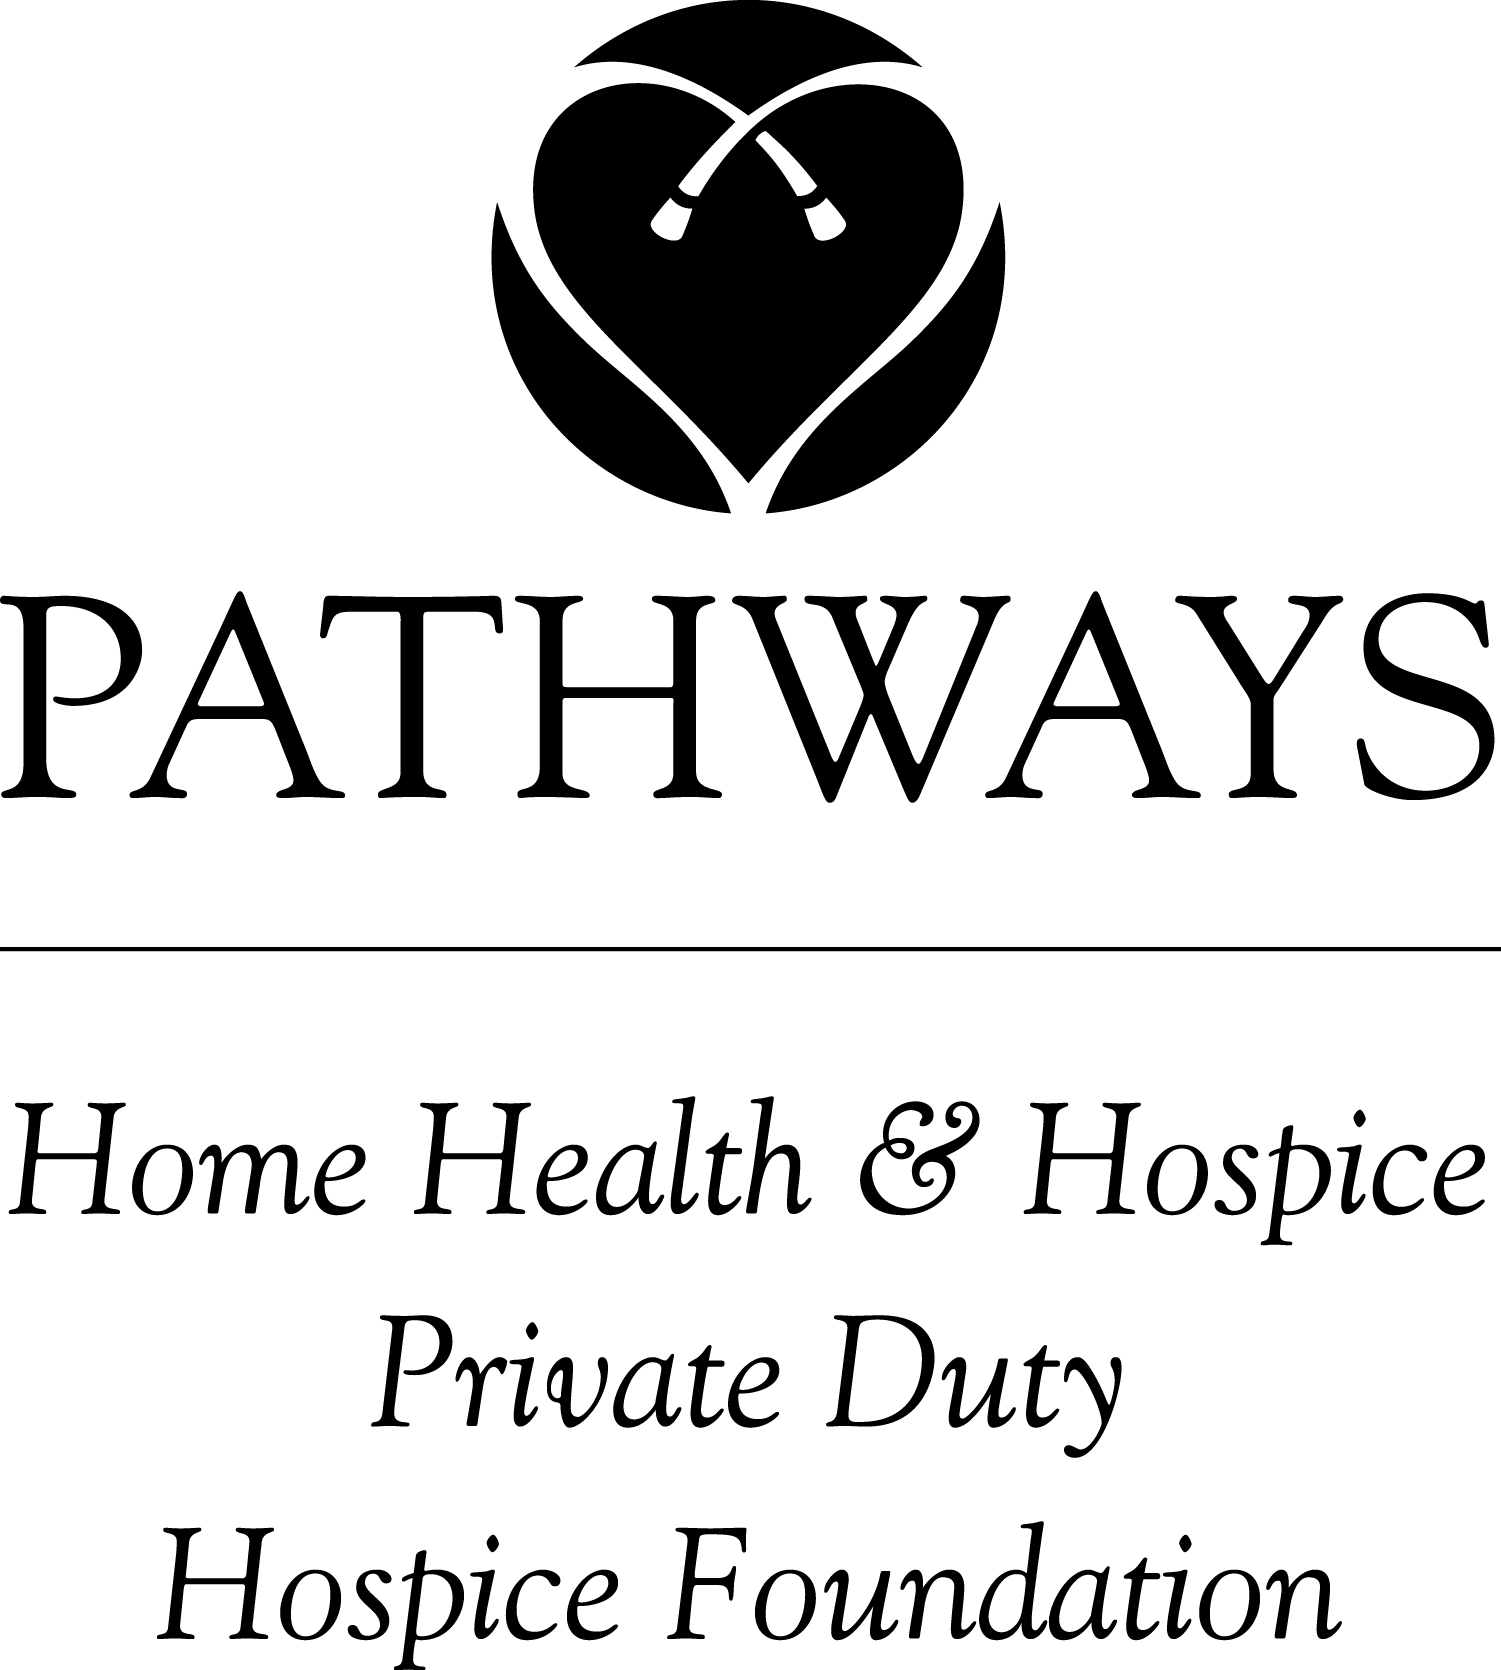 Pathways Home Health, Hospice & Private Duty